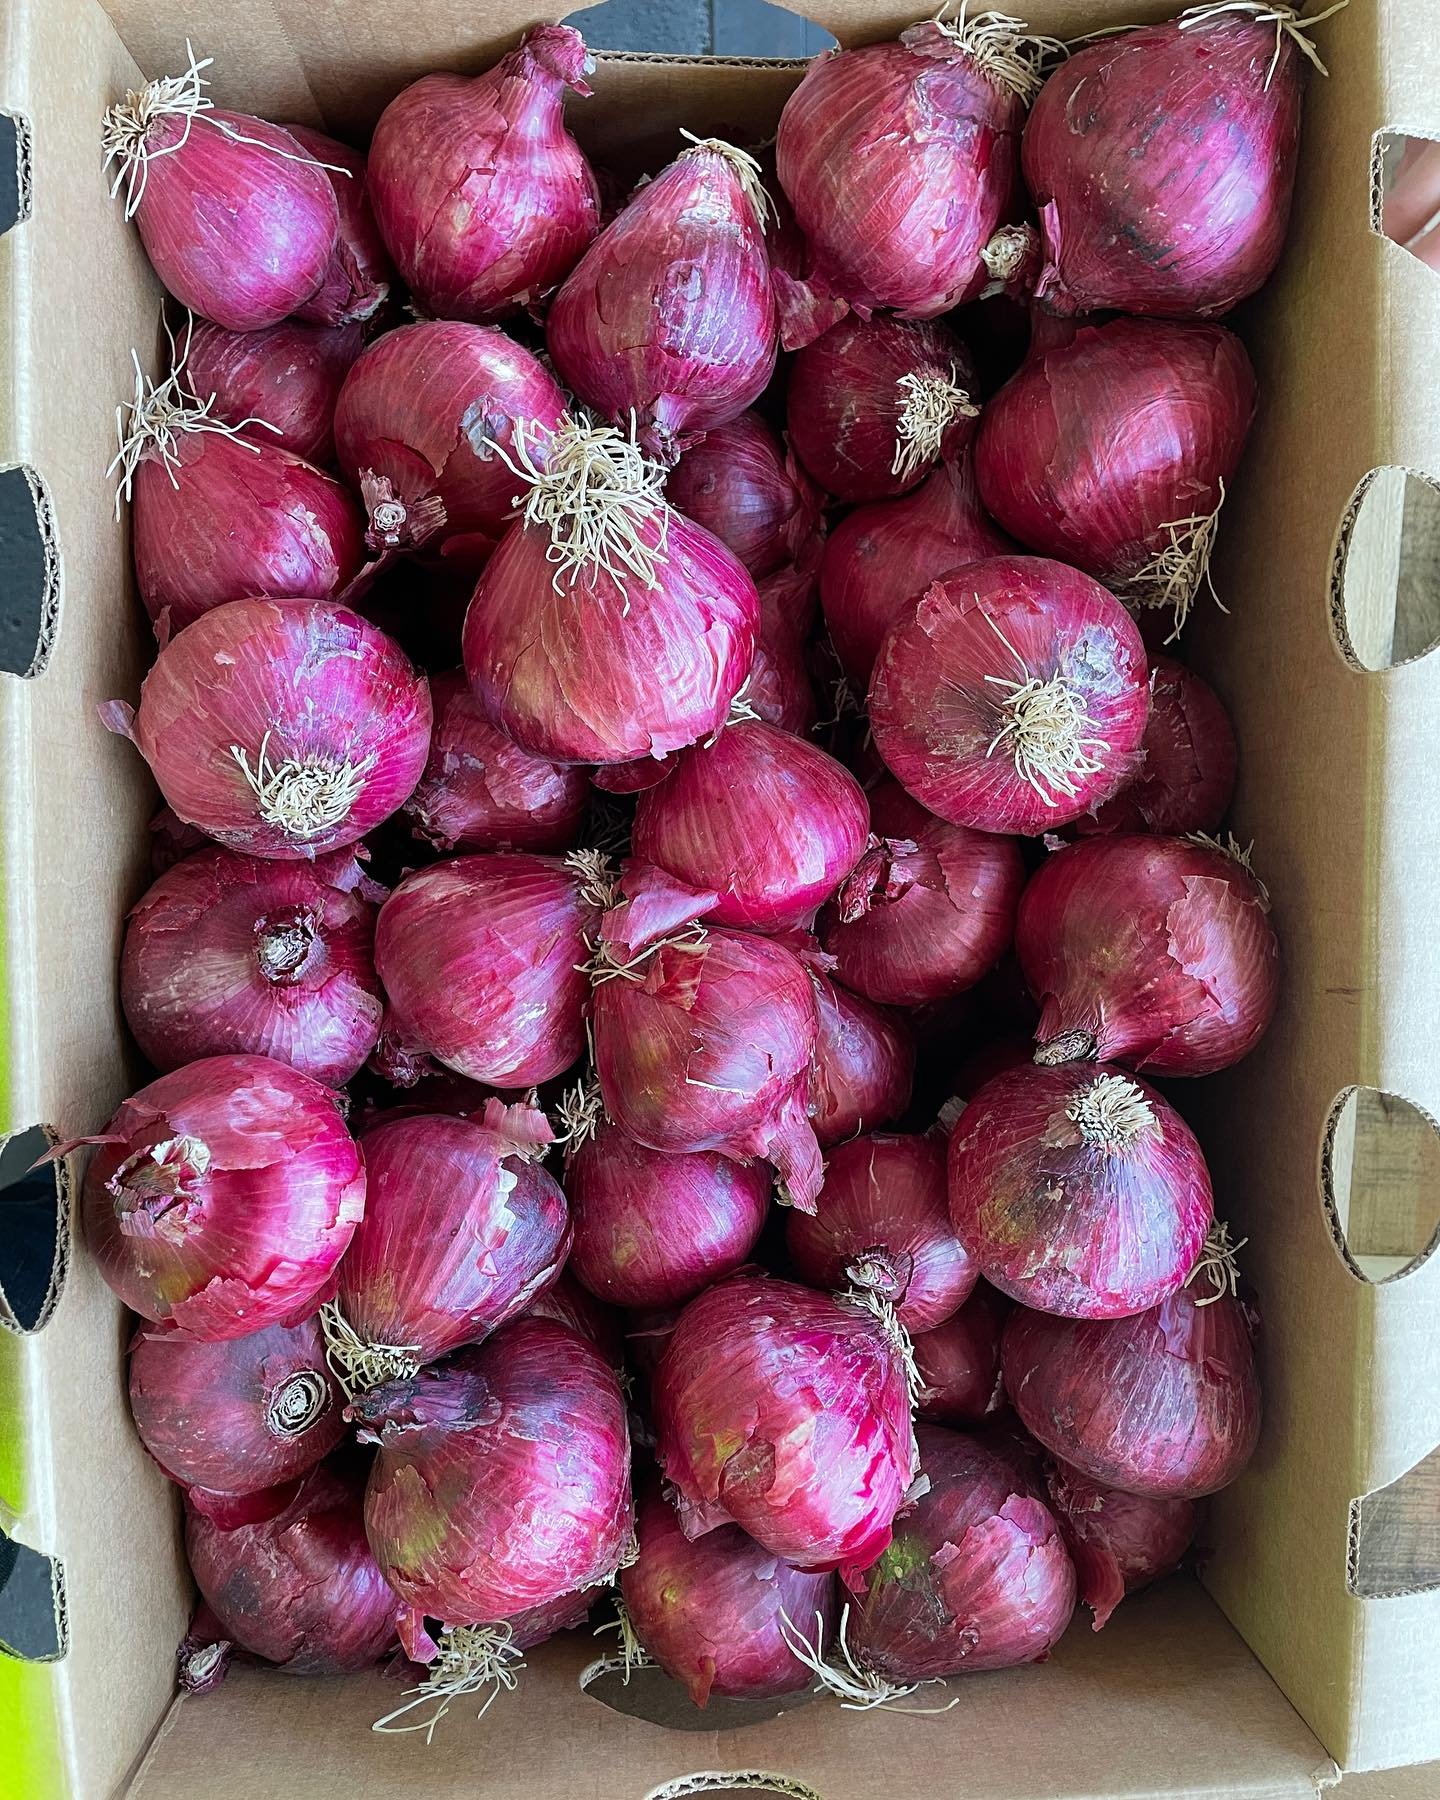 💥💥Fresh crop alert!!!💥💥

While it may pass the radar of most folks, Onions and Potatoes are indeed seasonal crops! They start in California, move up to the Pacific Northwest, where they&rsquo;re metered out from storage to create a seem less tran